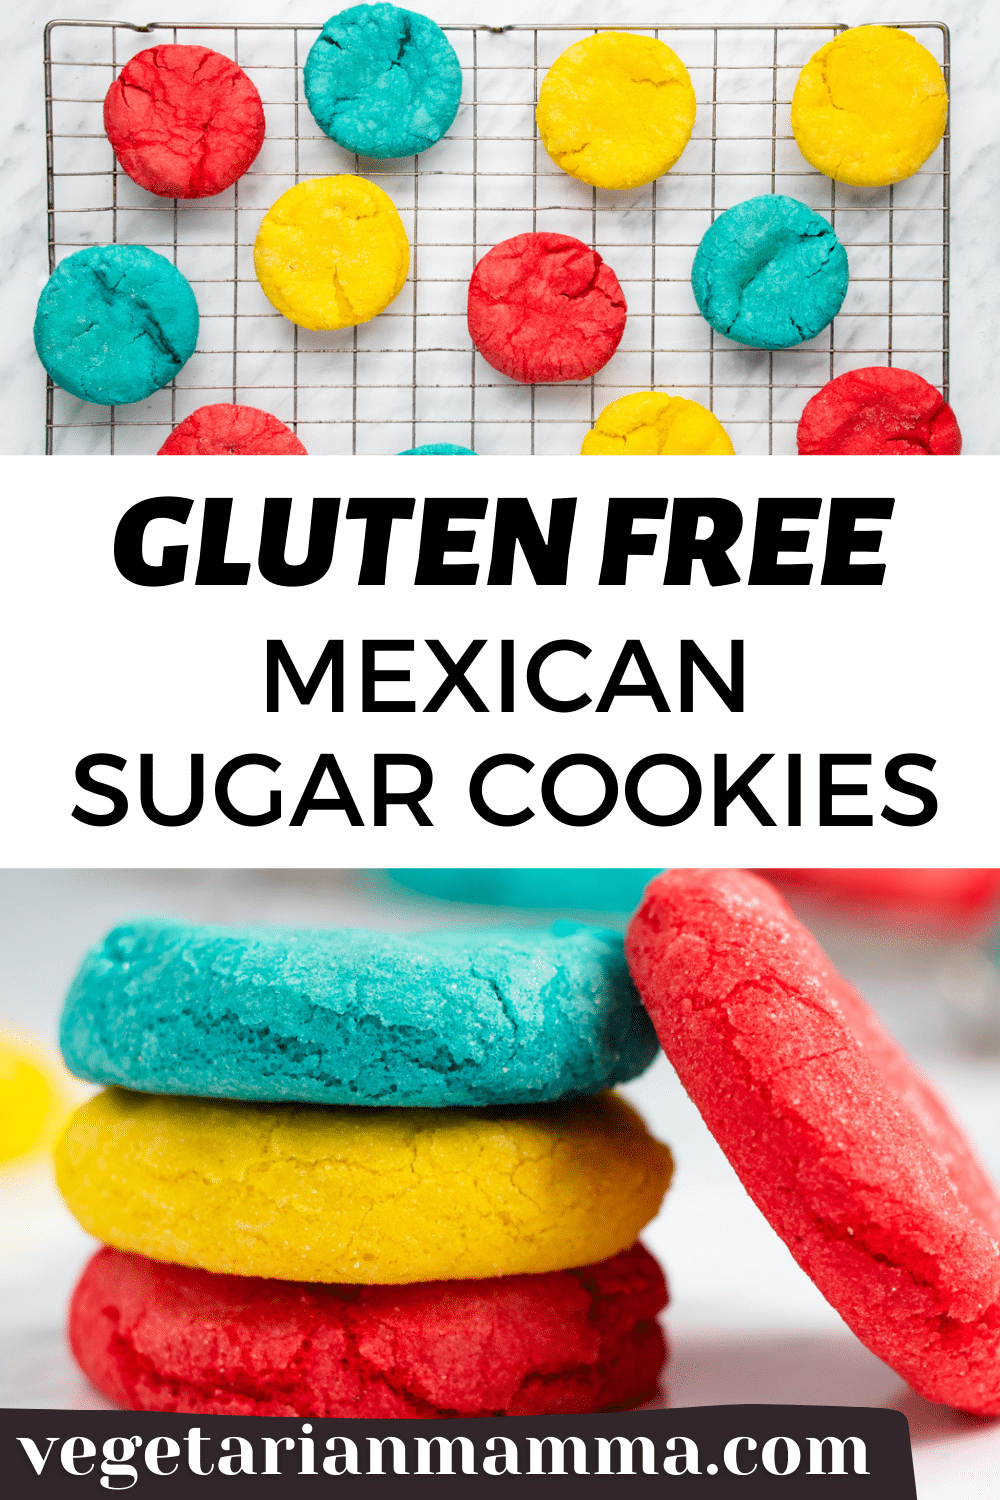 Soft and chewy, and super bright and colorful, these gluten-free Mexican Sugar Cookies are sure to put a smile on anyone's face!